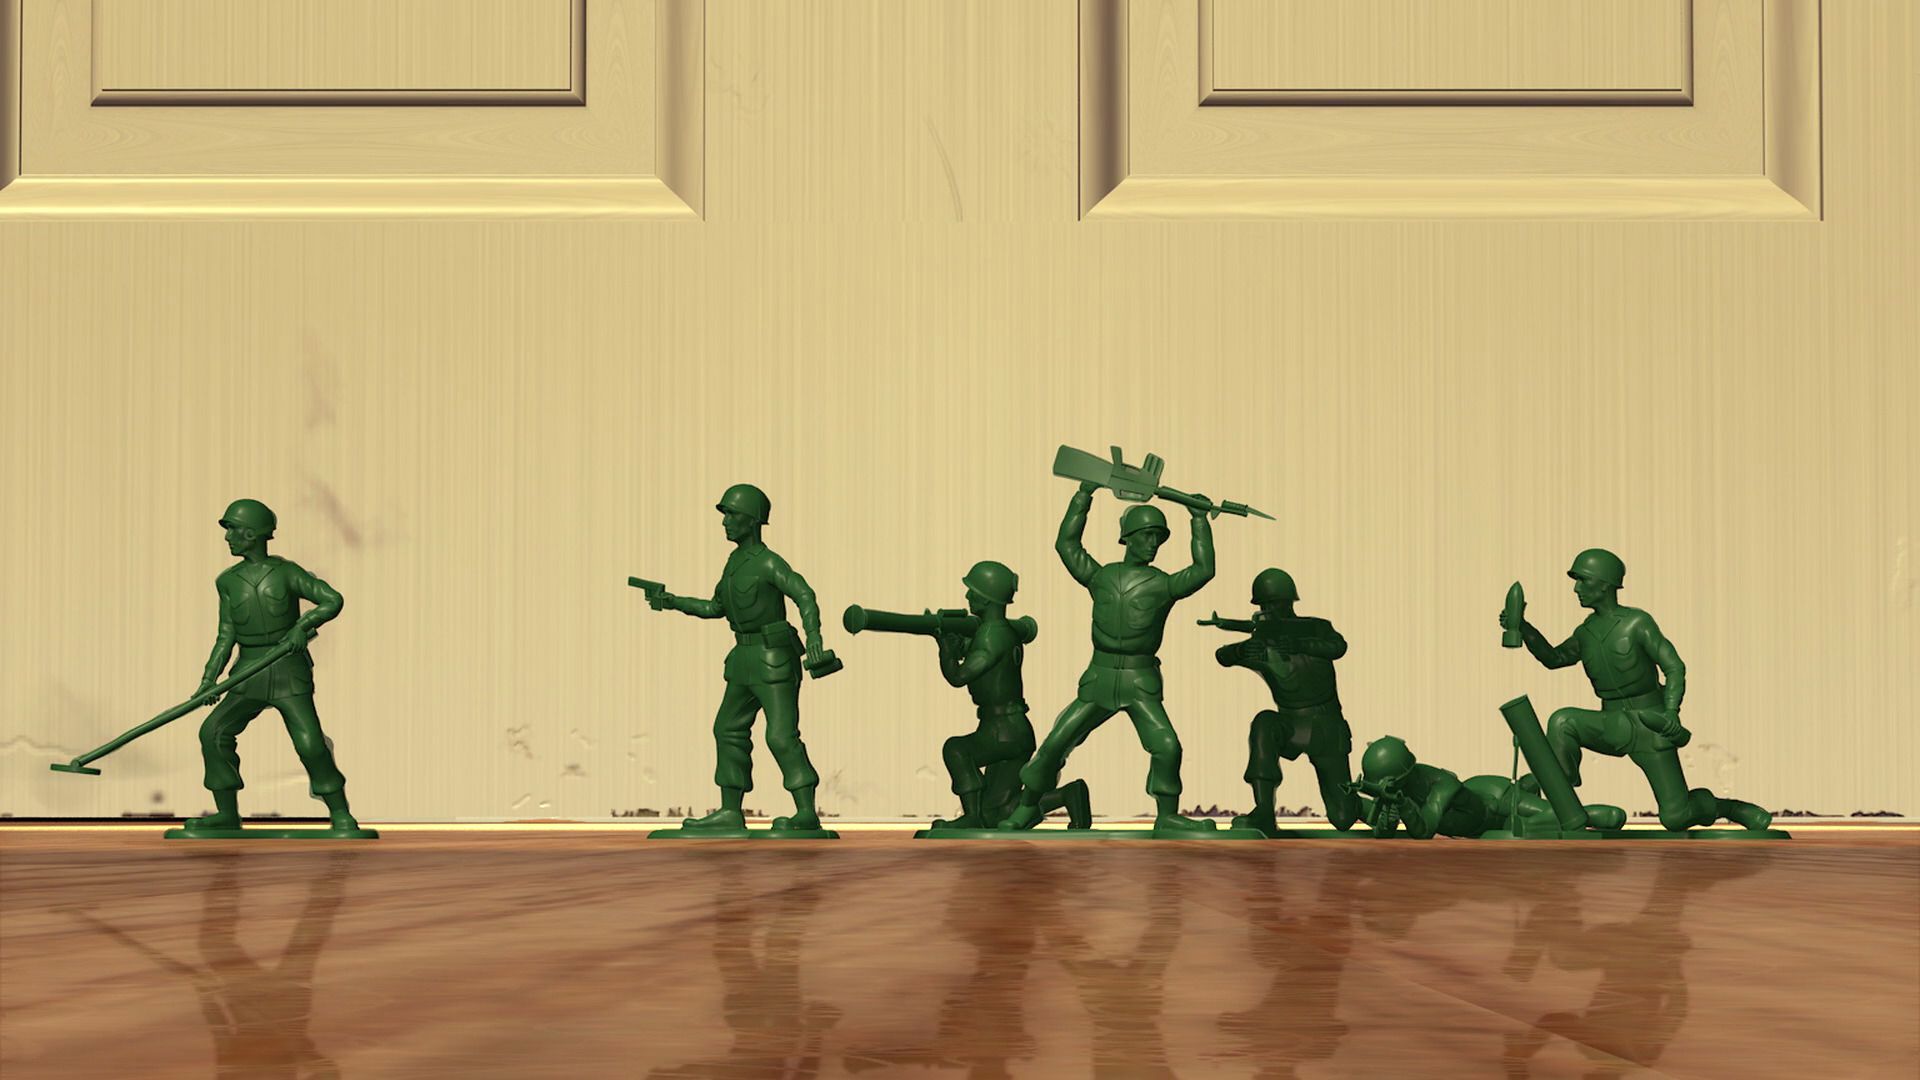 Sarge and the Green Army Men in Toy Story at the bottom of Andy's door.